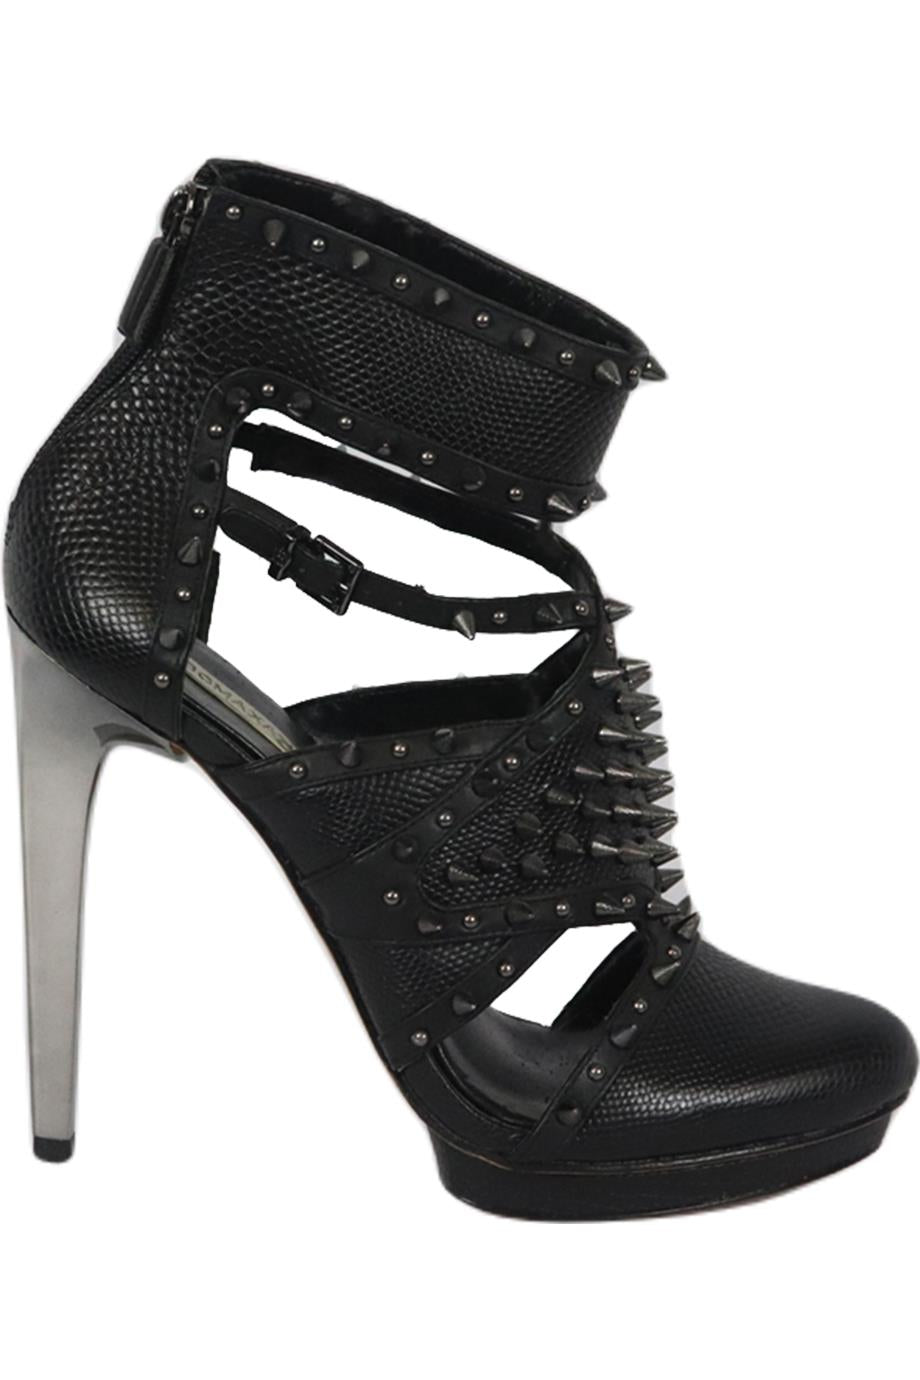 Christian Louboutin Cendre/Gunmetal Spiked Willetta 100 Ankle Boots Size  7.5/38 - Yoogi's Closet